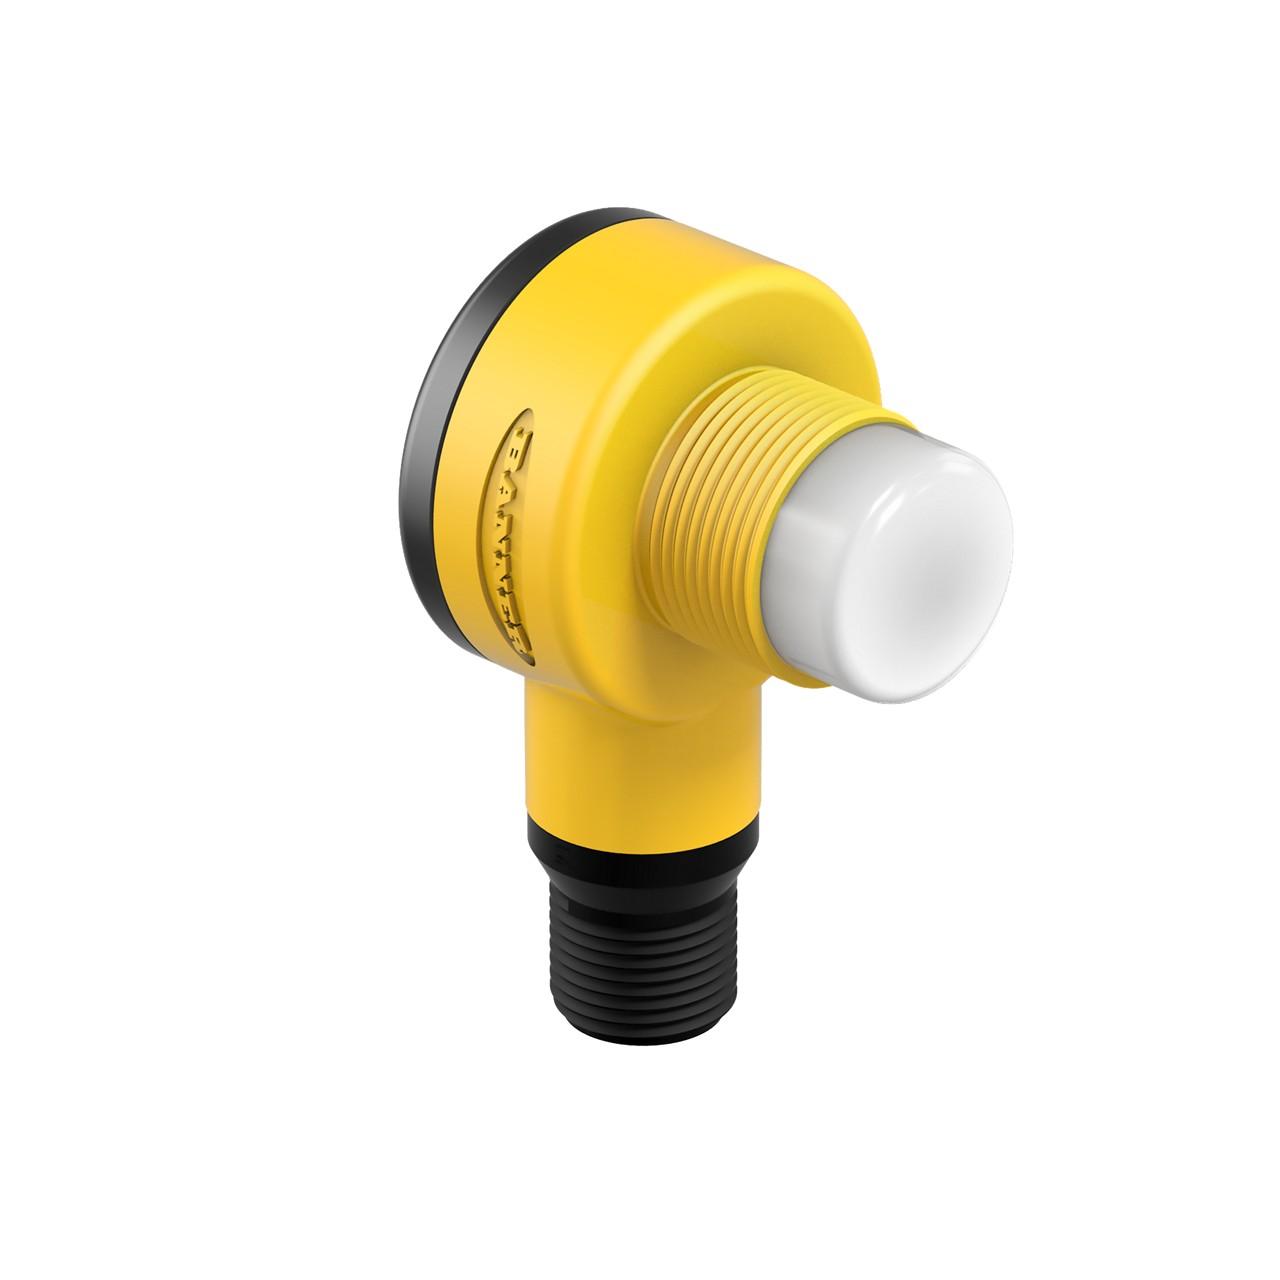 Banner T18XXYPQ T18 Series EZ-LIGHT: 1-Color General Purpose Indic, Voltage: 10-30V dc; Housing: Thermoplastic Poly; I, Input: PNP; Colors: Yellow, Euro-style Quick-Disconnect Connector